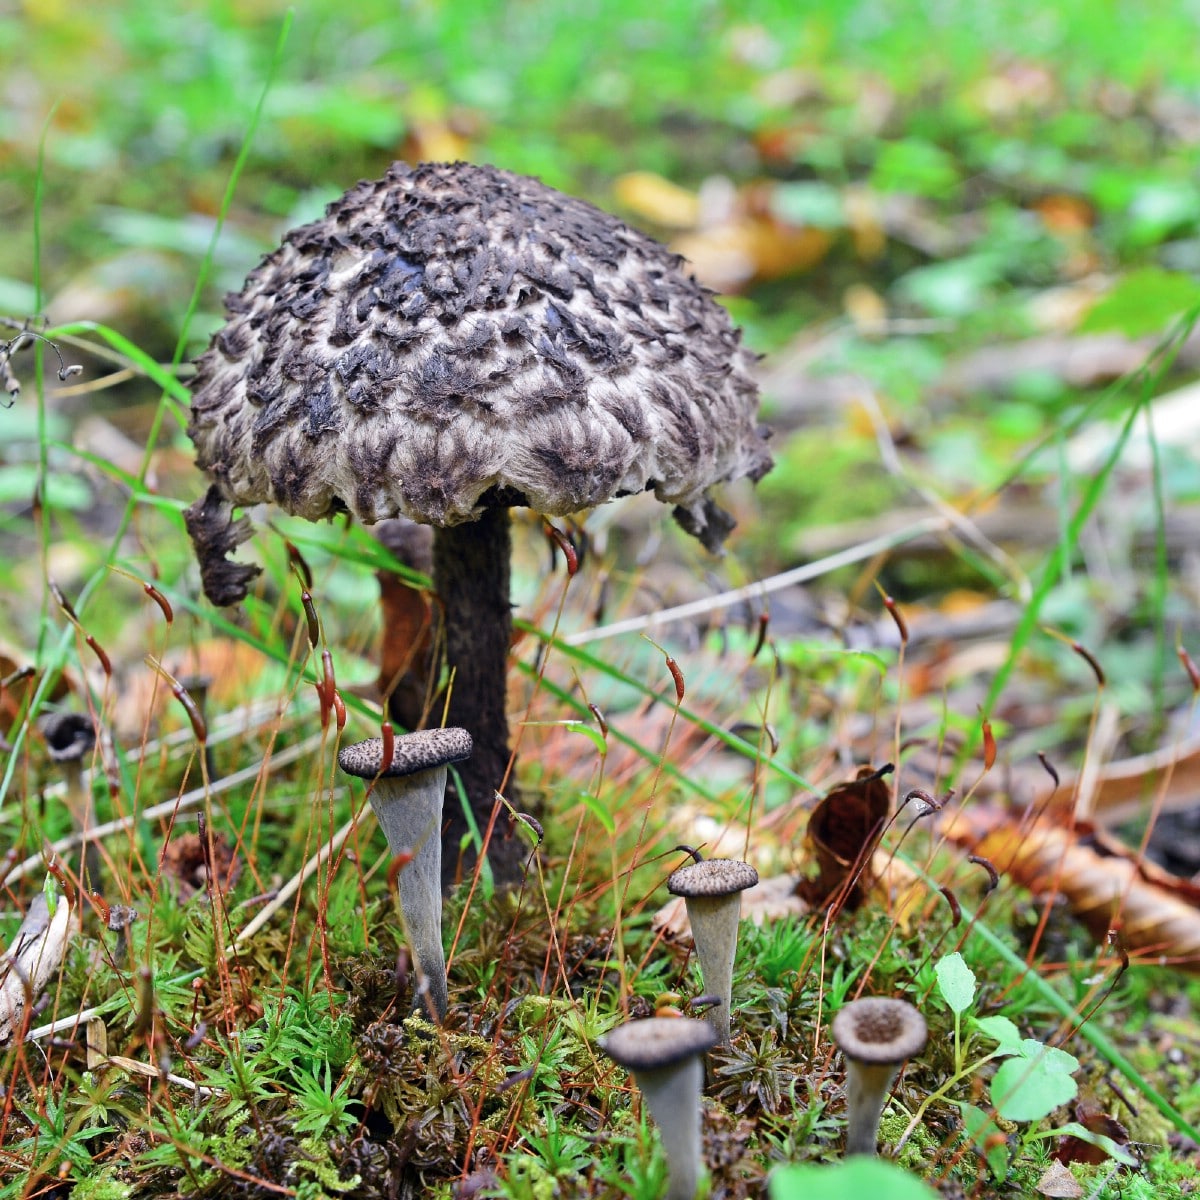 Old man of the woods on forest floor with black trumpets